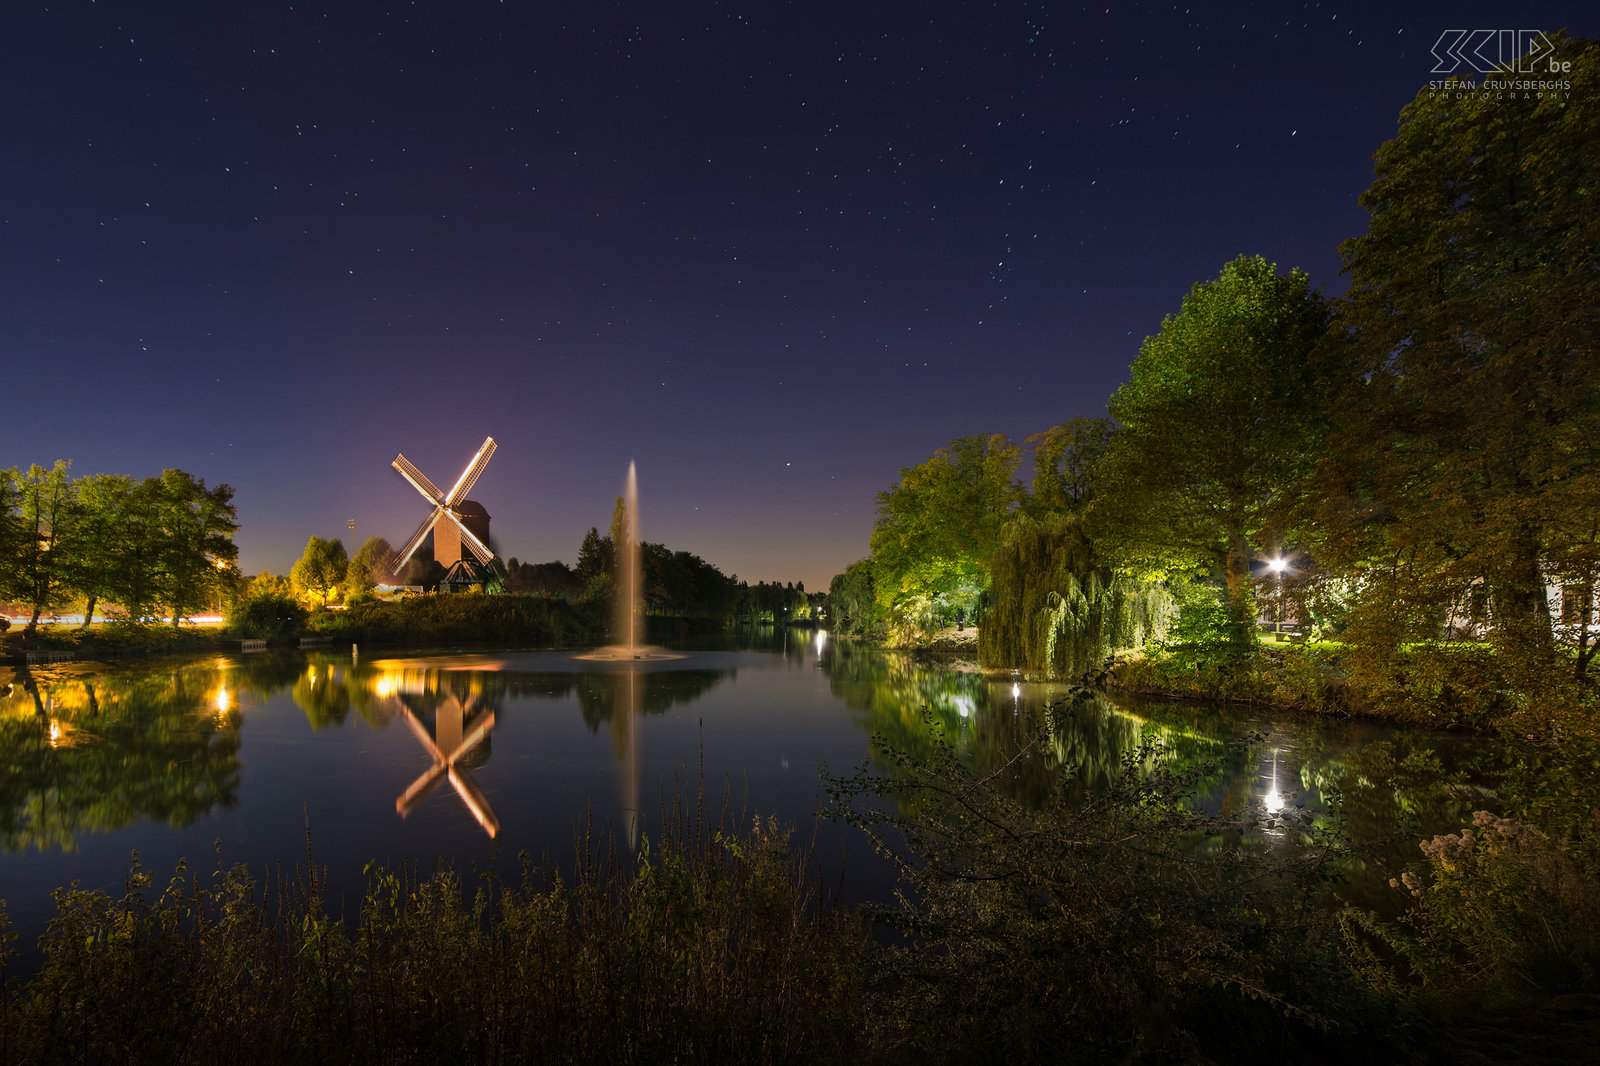 Hageland by night  Linden mill in Diest The Linden mill at the Provincial Domain Half Moon in Diest. This large stake mill was built in 1742 and was originally located in Schaffen but in 1959 it was rebuilt on the old city walls in Diest Stefan Cruysberghs